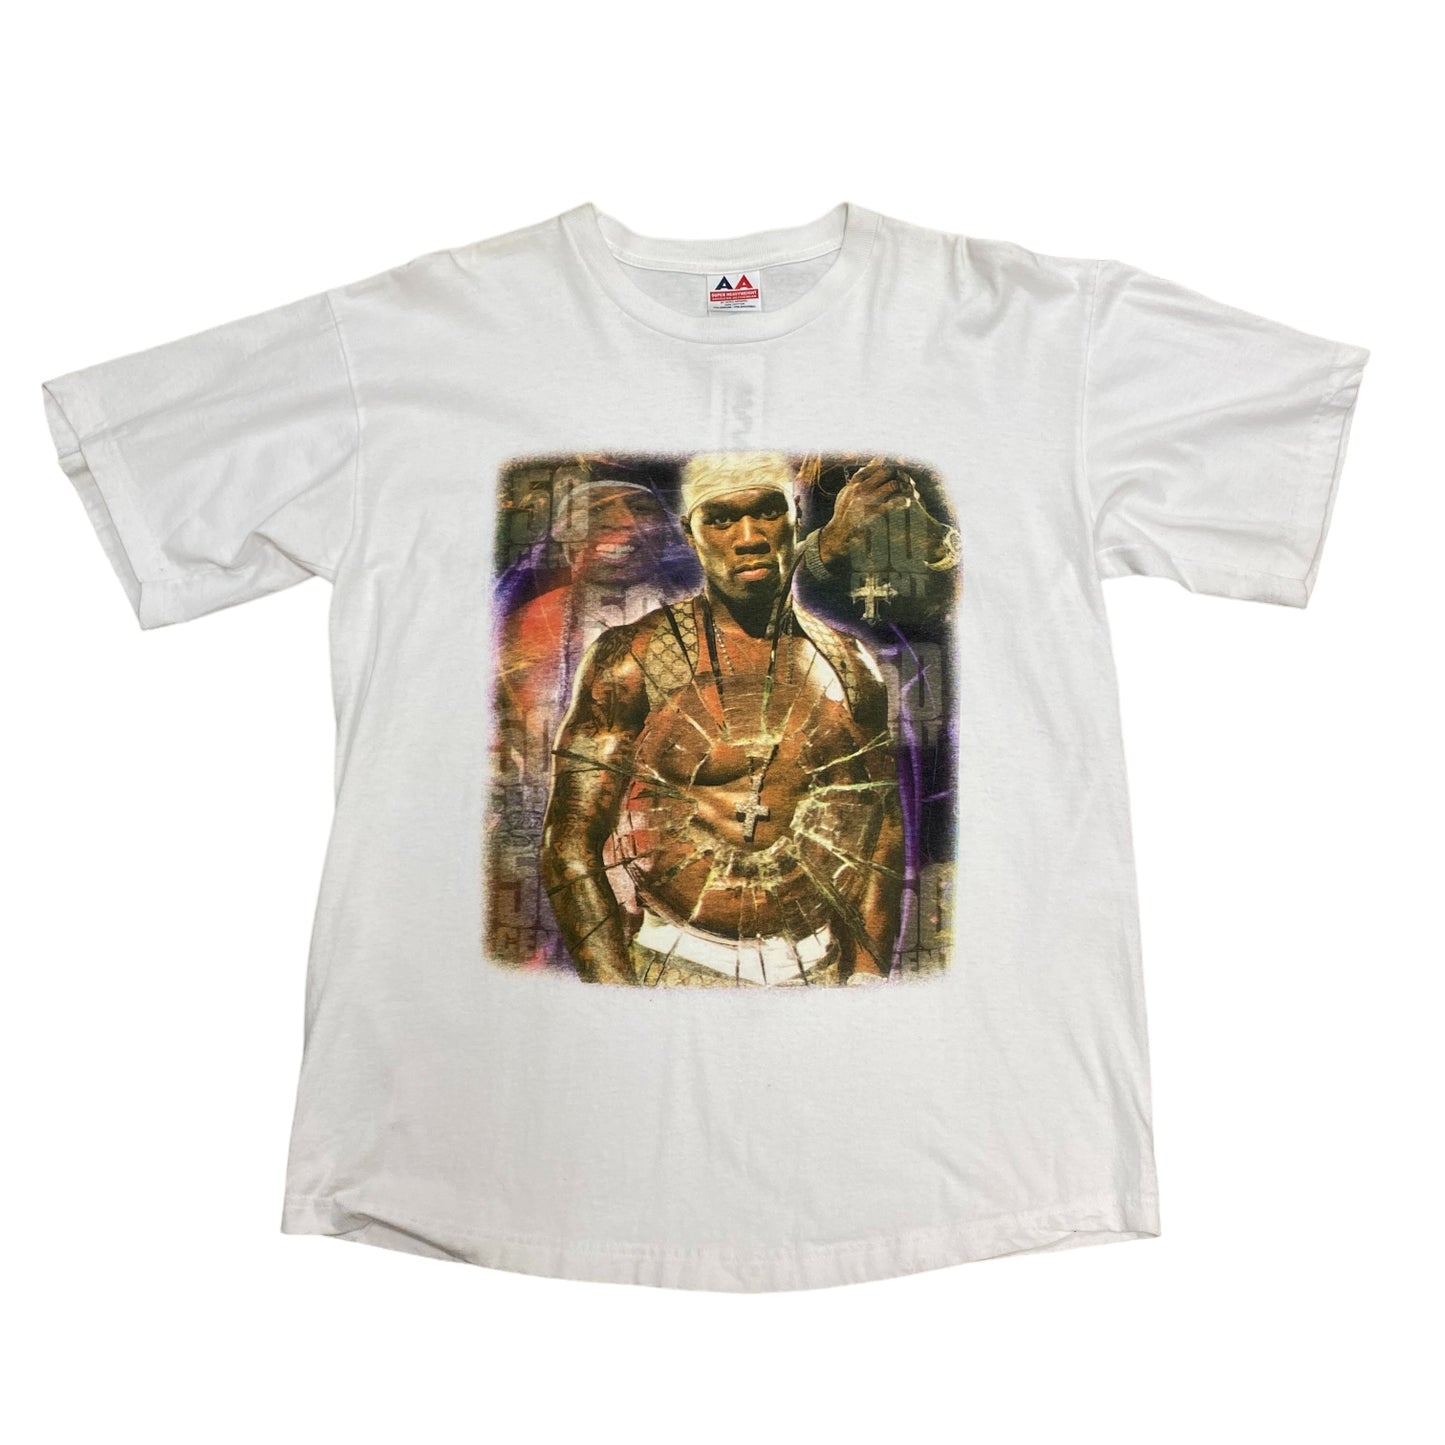 2003 50 Cent Rap Tee (Get Rich or Die Trying) Vintage T-shirt